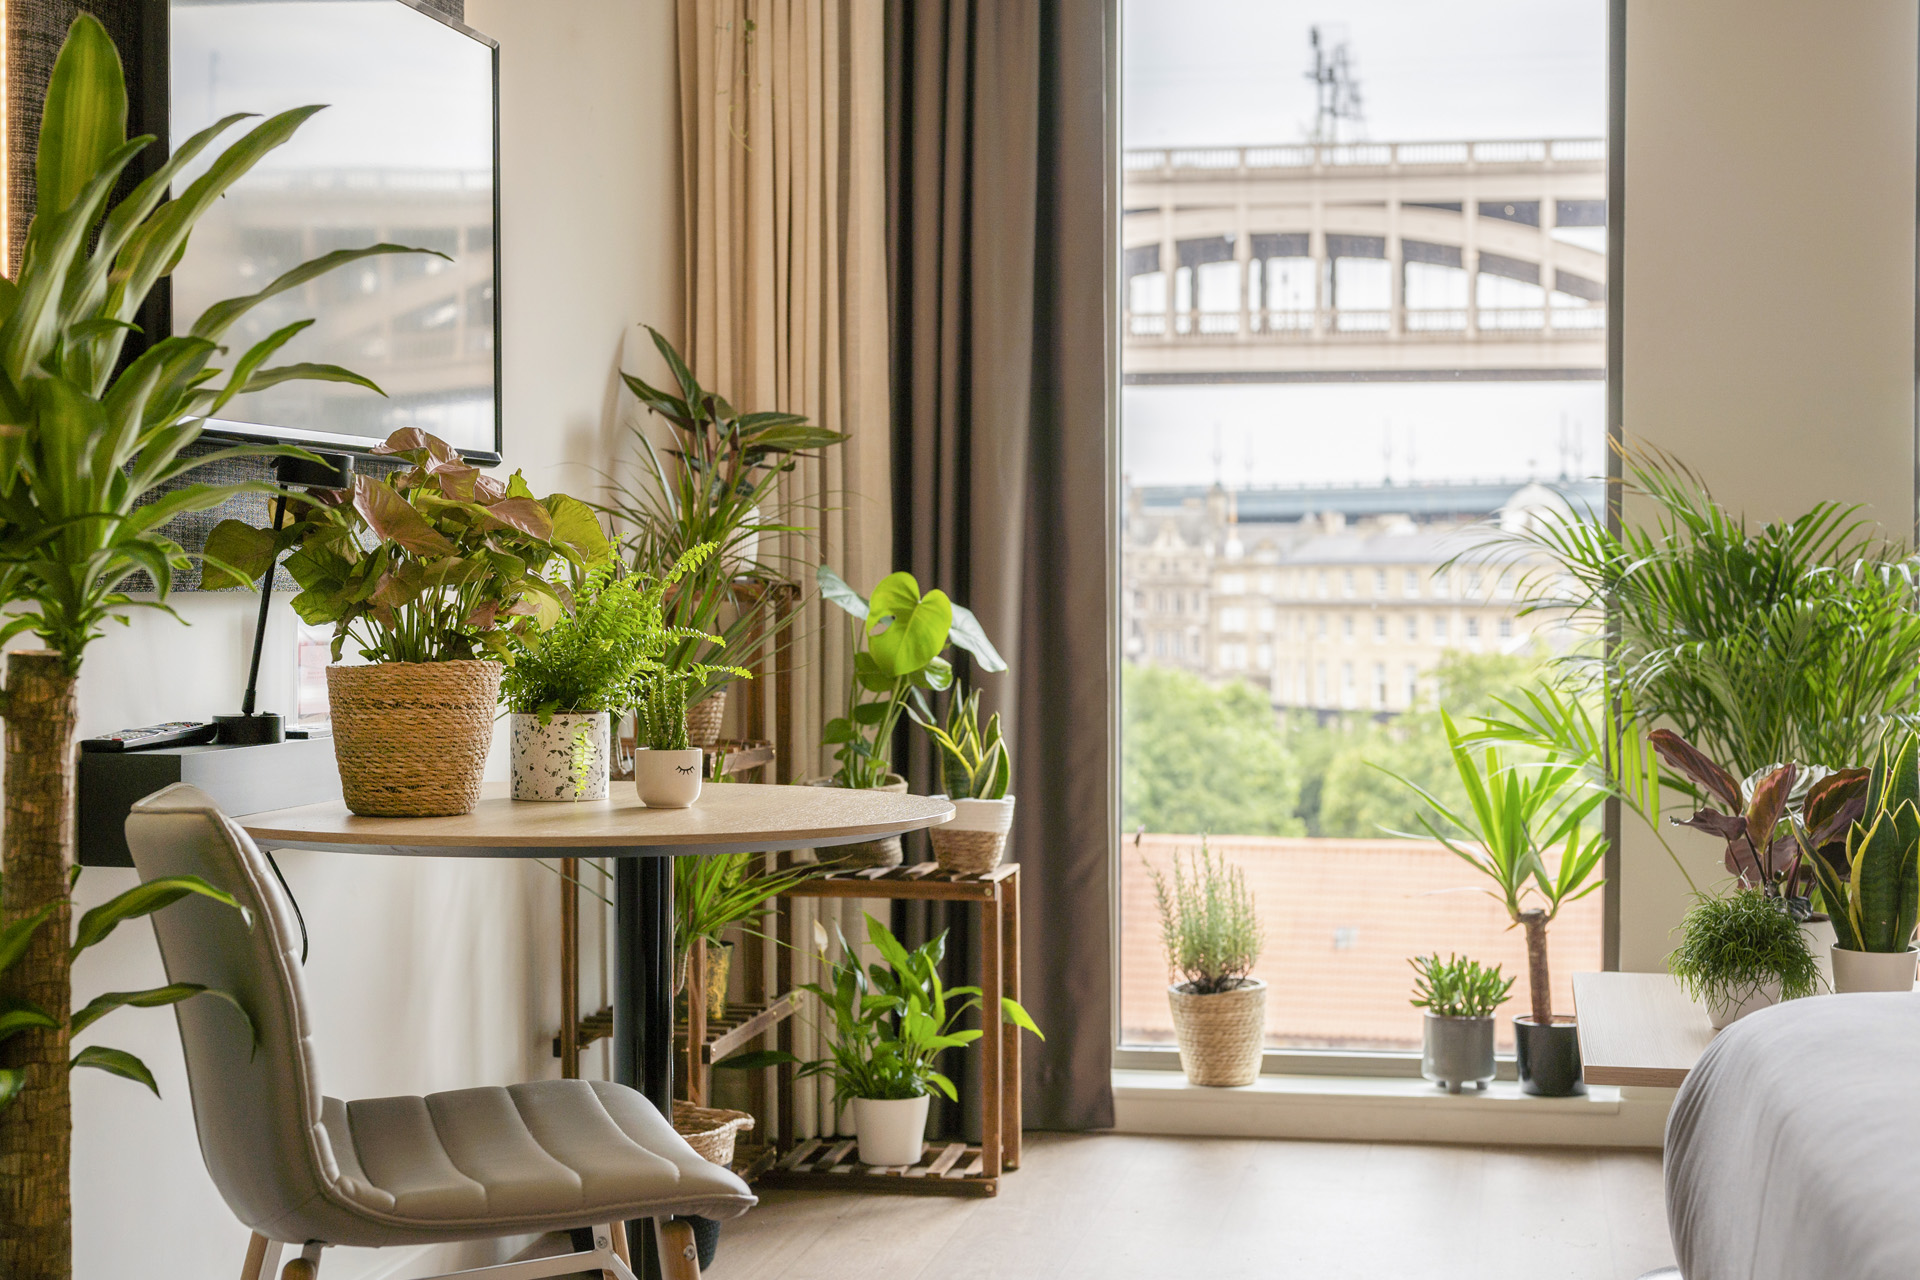 Botanical Bedrooms: Staycation Hotels for Plant Lovers - Travel